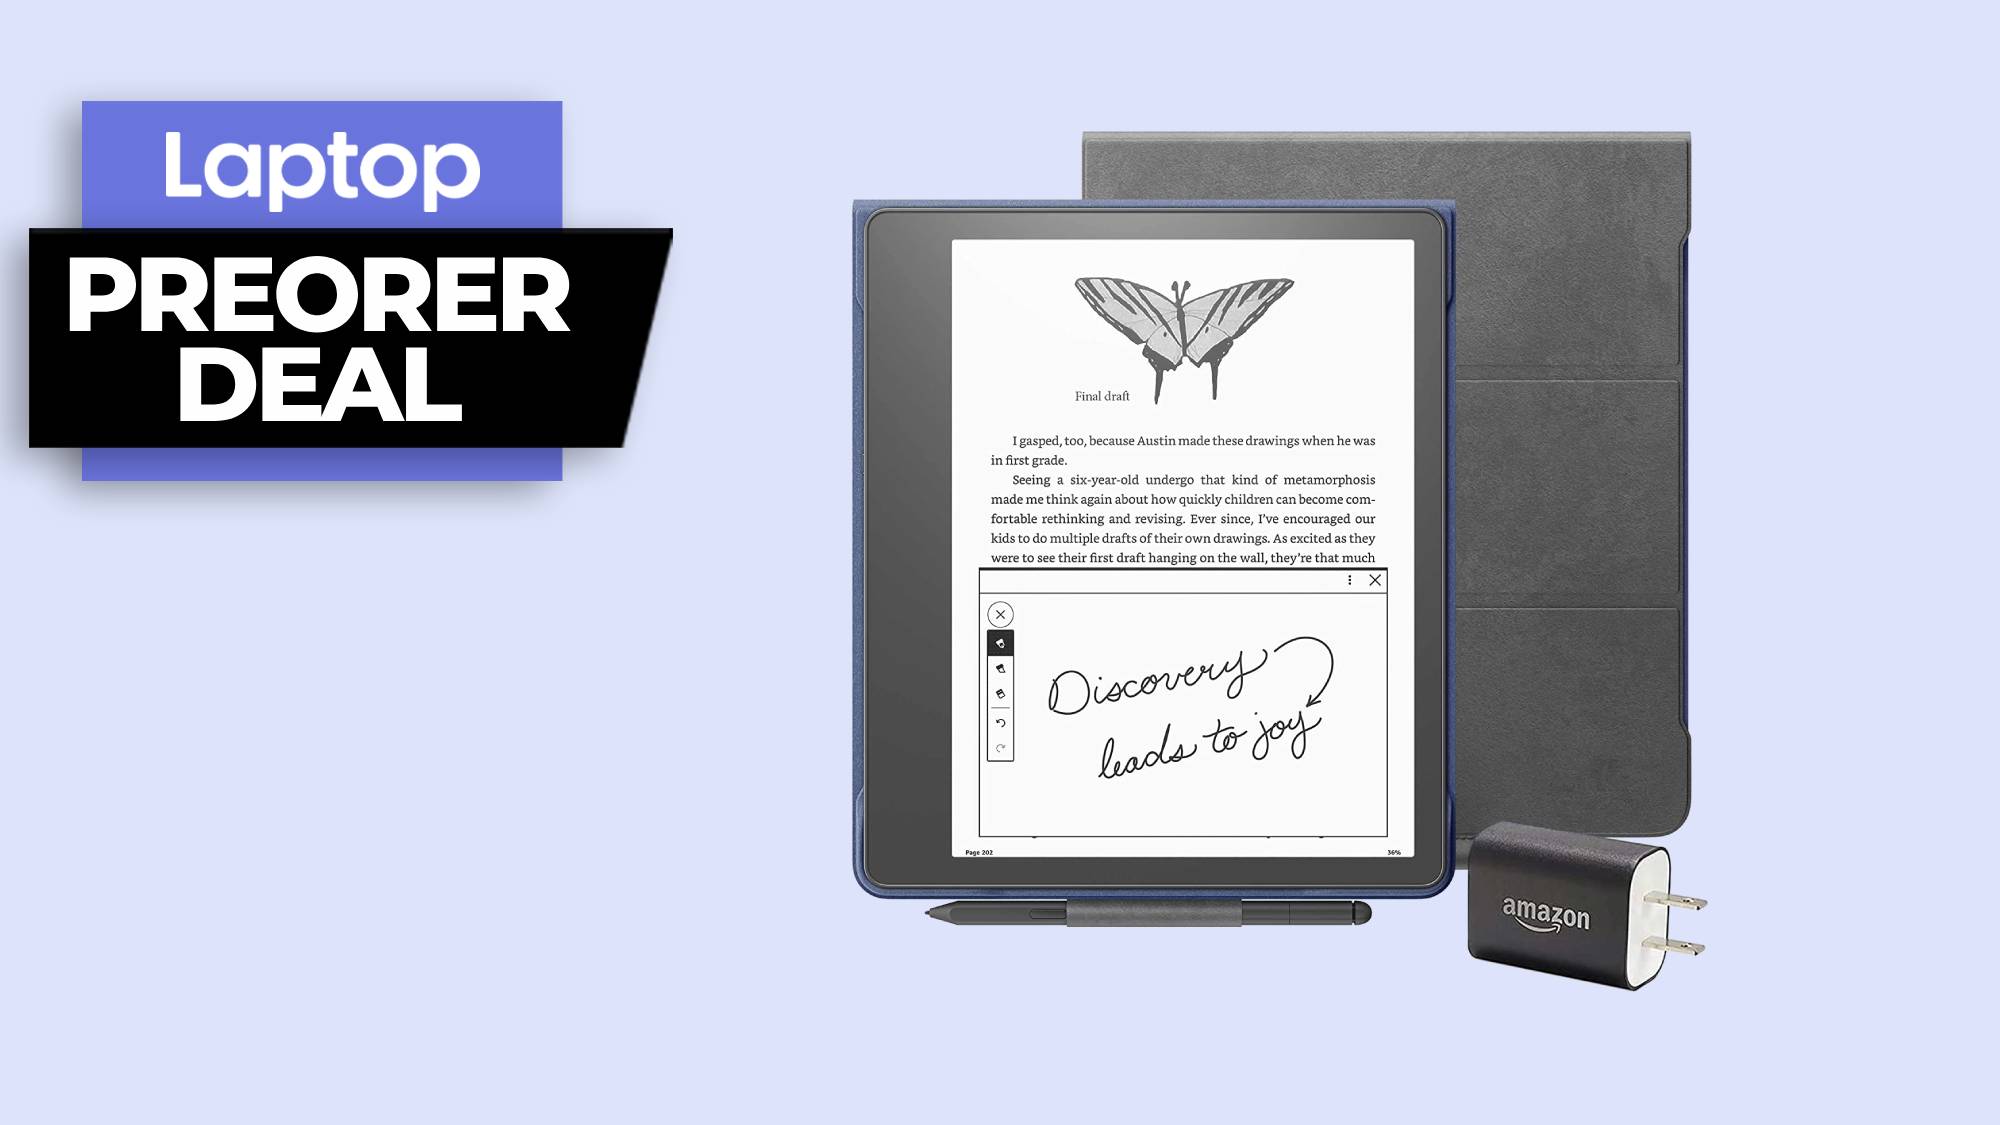 Kindle Scribe adds writing support to Amazon's wildly popular e-readers